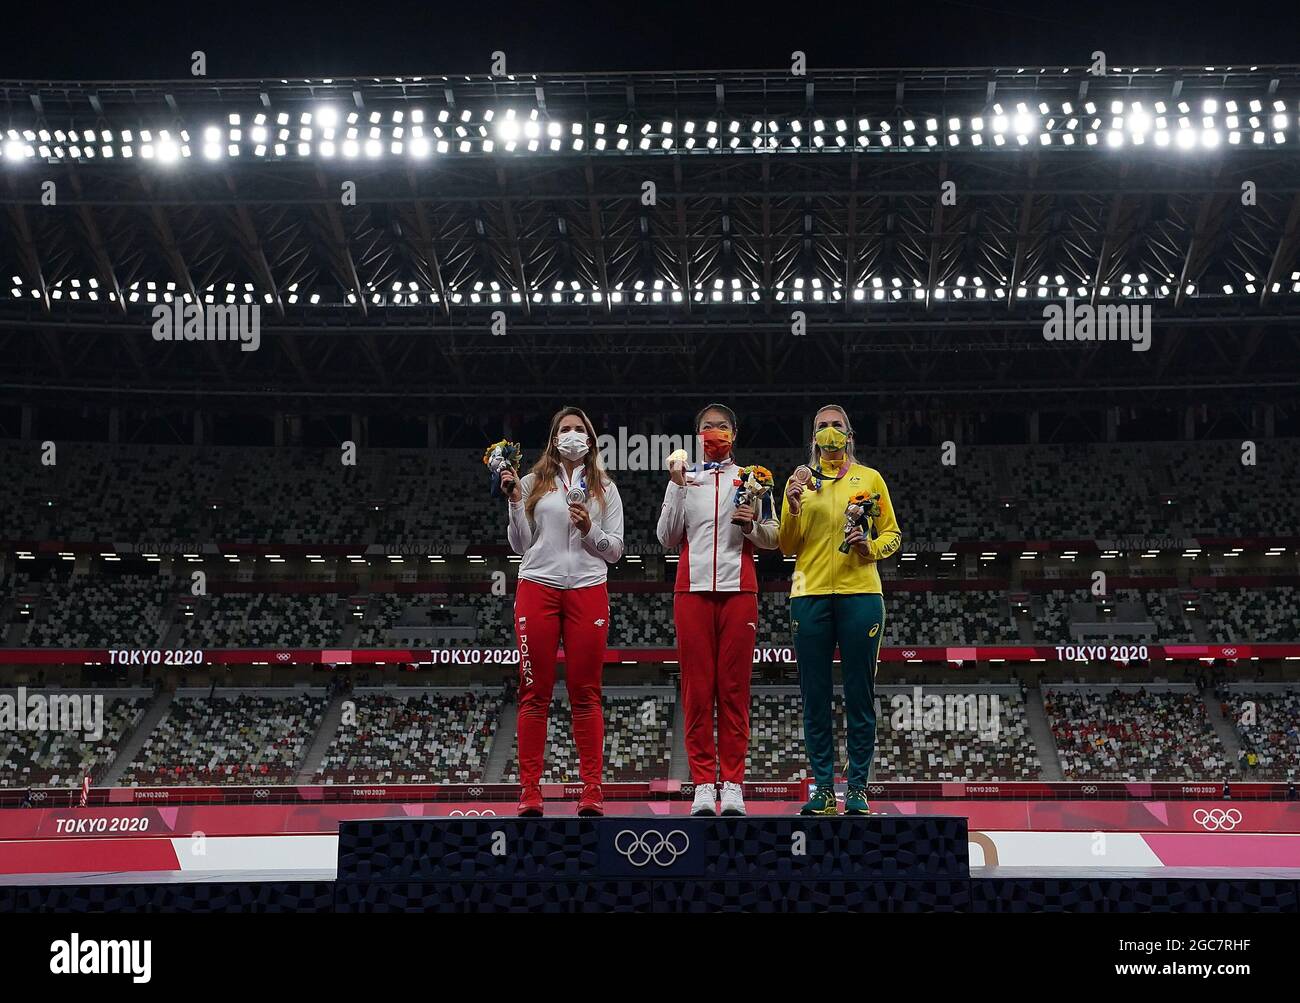 Tokyo, Japan. 7th Aug, 2021. Gold medalist Liu Shiying (C) of China, silver medalist Maria Andrejczyk (L) of Poland and bronze medalist Kelsey-Lee Barber of Australia react during the awarding ceremony of the Women's Javelin Throw at the Tokyo 2020 Olympic Games in Tokyo, Japan, Aug. 7, 2021. Credit: Lui Siu Wai/Xinhua/Alamy Live News Stock Photo